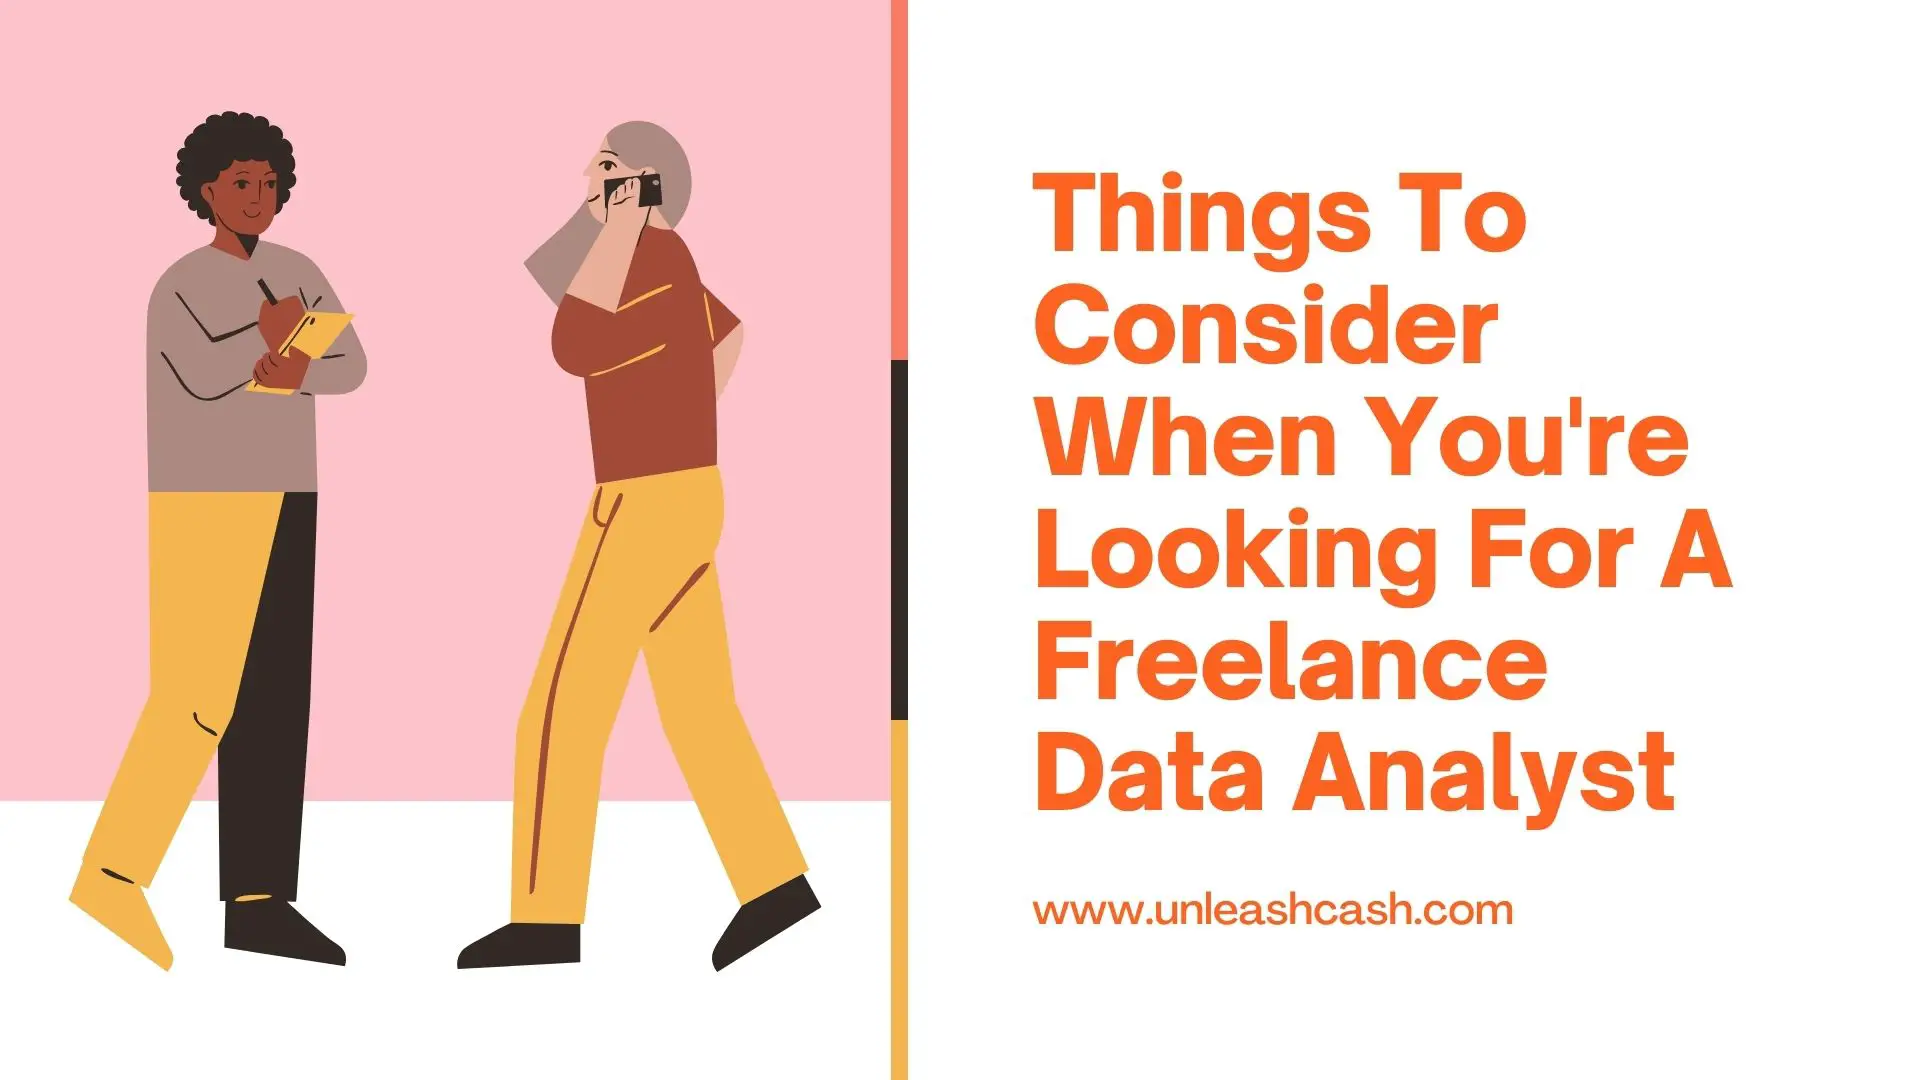 Things To Consider When You're Looking For A Freelance Data Analyst